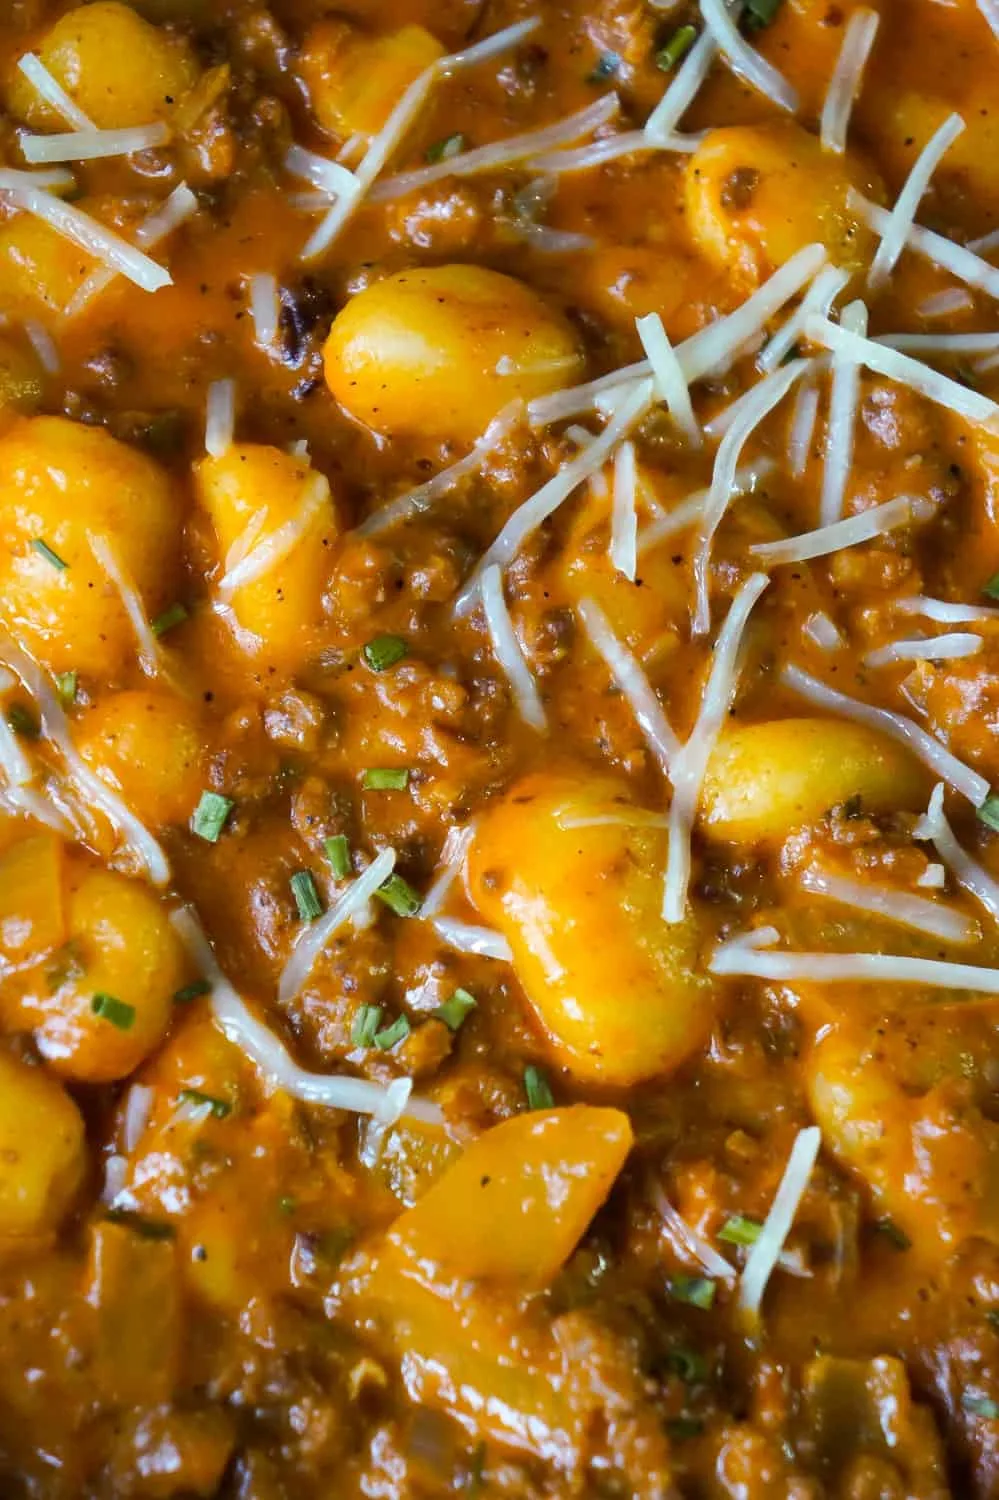 Gnocchi and Ground Beef with Tomato Sauce is an easy weeknight dinner recipe that takes less than 30 minutes from start to finish. These delicious mini potato dumpling are tossed in a sauce made from condensed tomato soup, along with some ground beef and real bacon bits.